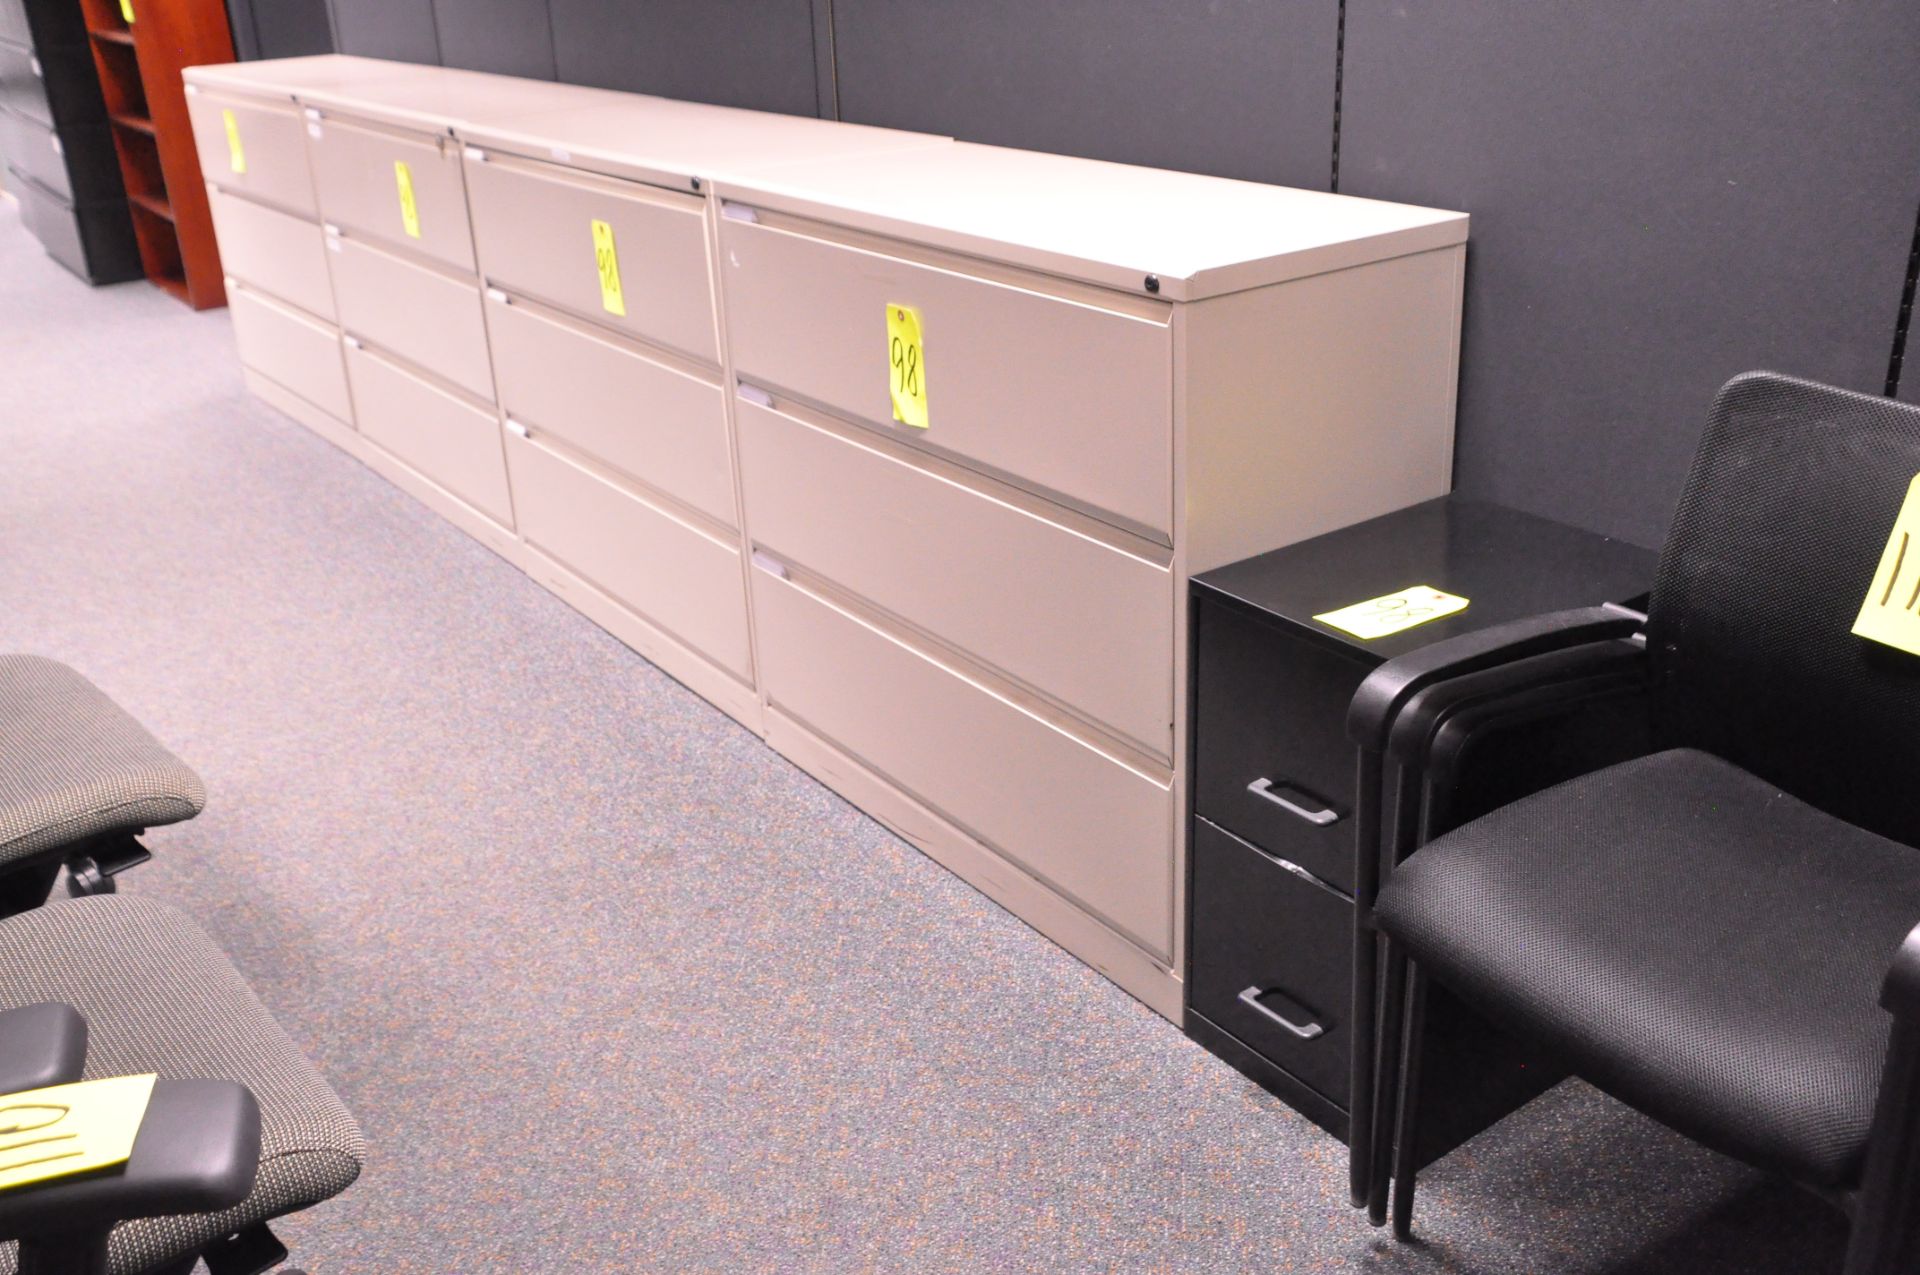 Lot-(4) 3-Drawer Lateral File Cabinets, (Beige), in (1) Group, (Located 1st Floor Offices)